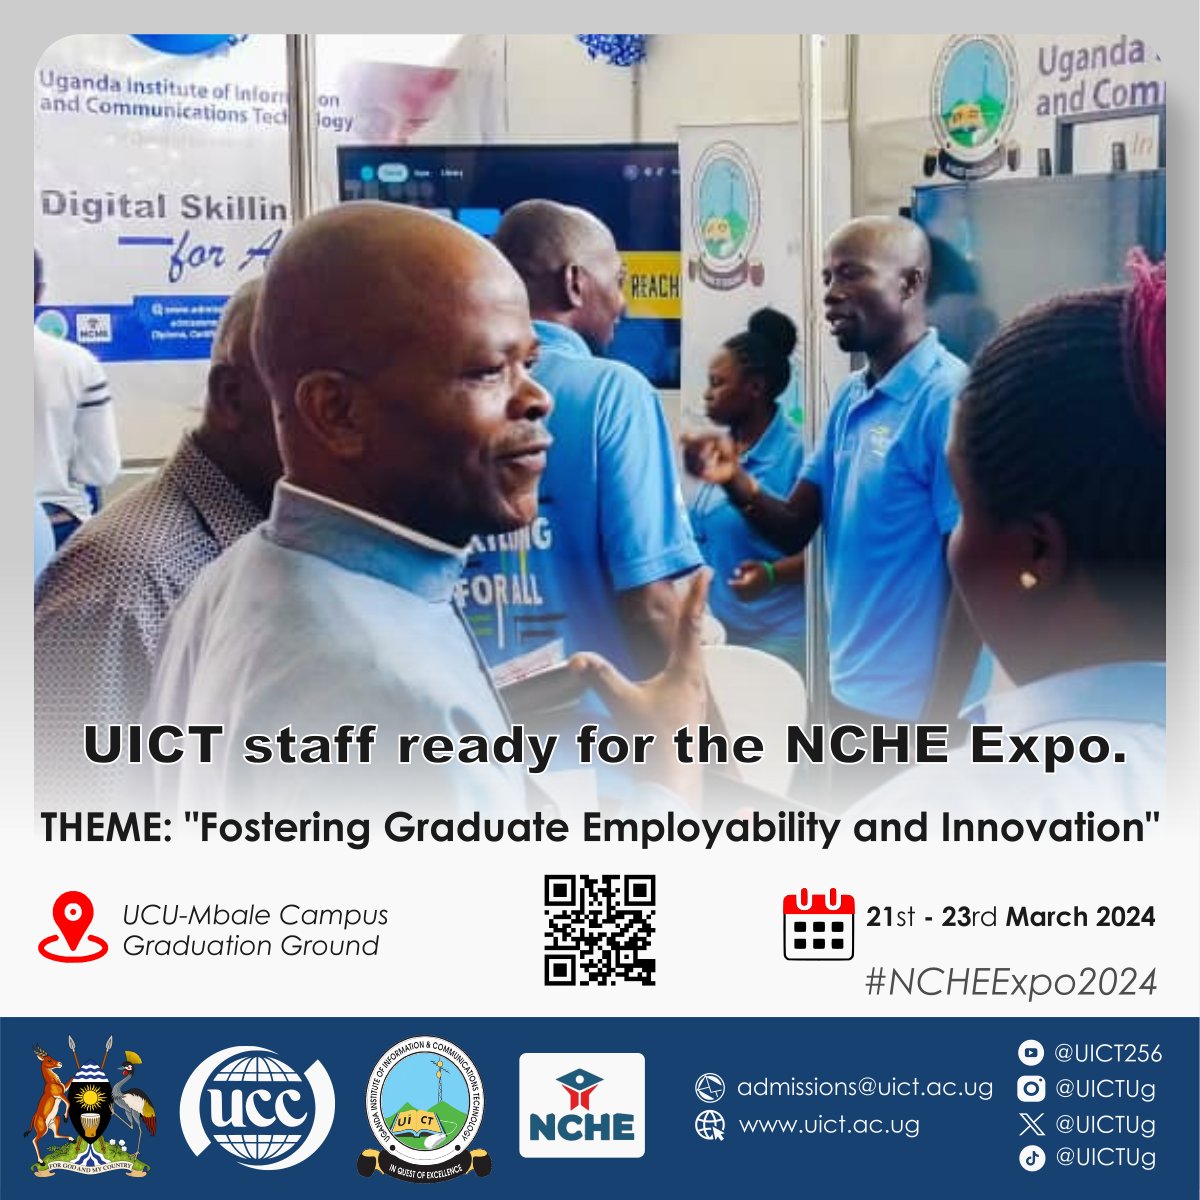 @UICTug staff at the @NCHE_Uganda Expo in Mbale- ready to showcase how we are fostering graduate employability through digital skilling. This enhances productivity and efficiency in service delivery. #NCHEExpo2024 @UCC_Official @UCC_ED